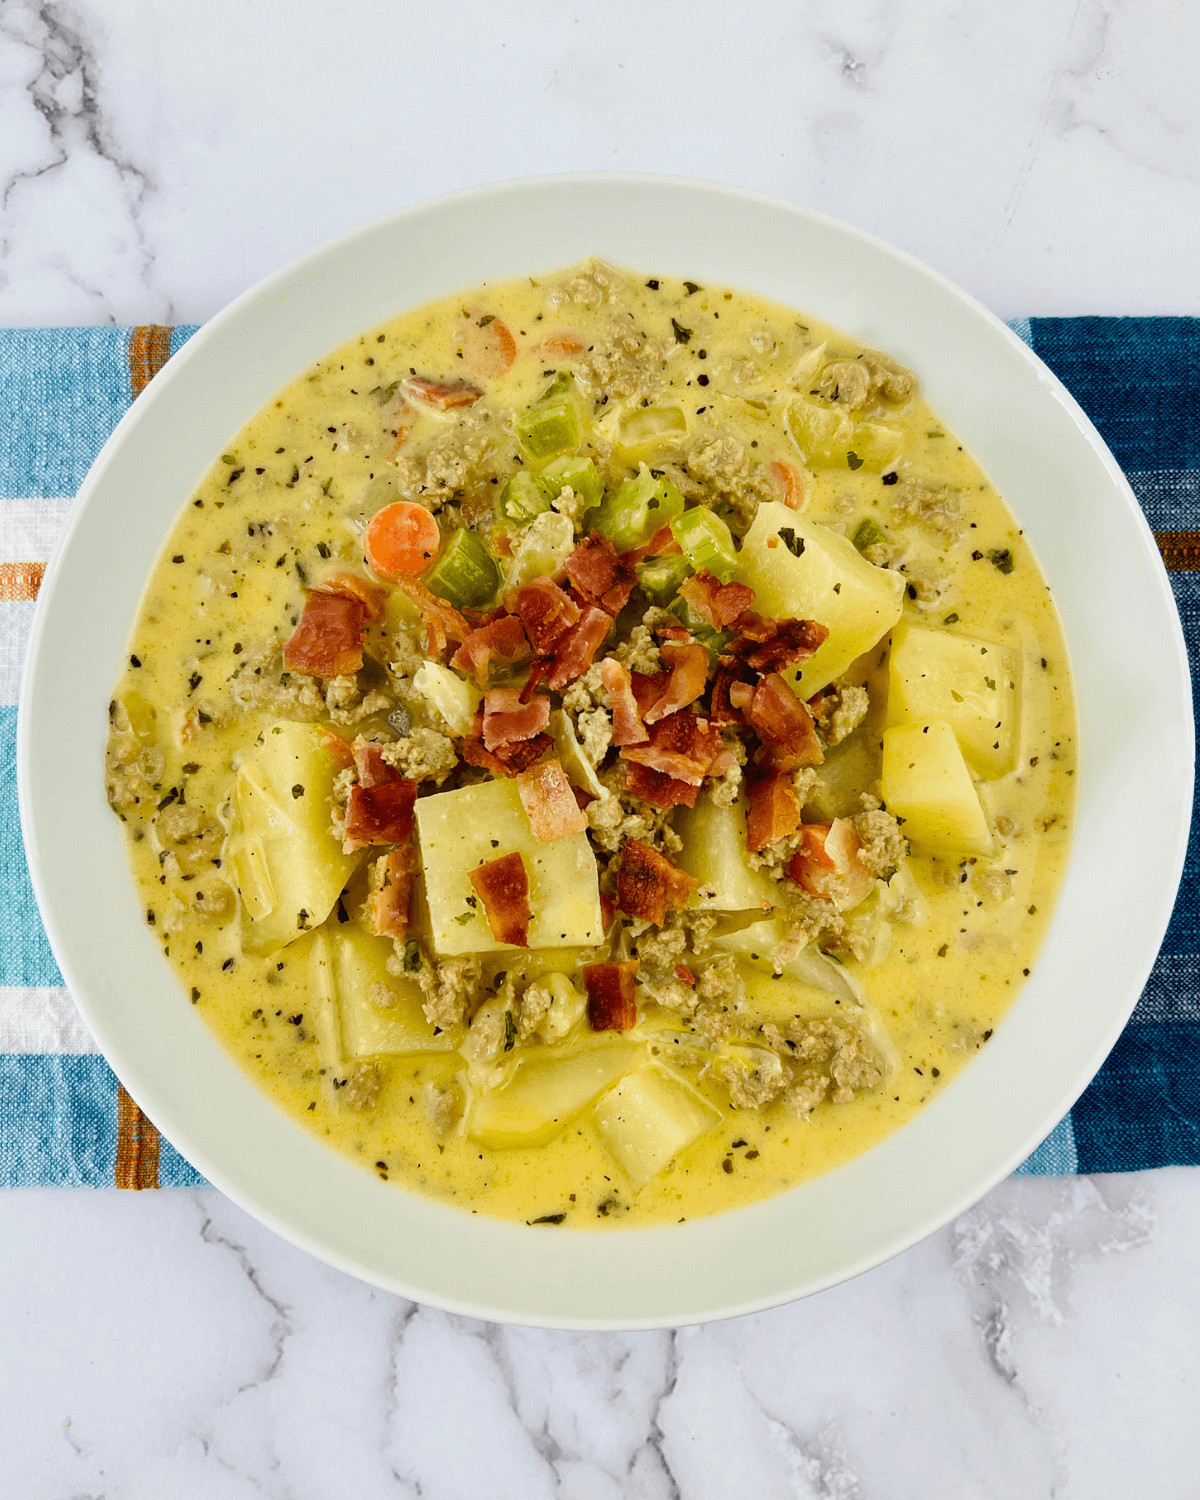 A bowl of soup with potatoes and bacon, also known as Bacon cheeseburger Potato Soup.